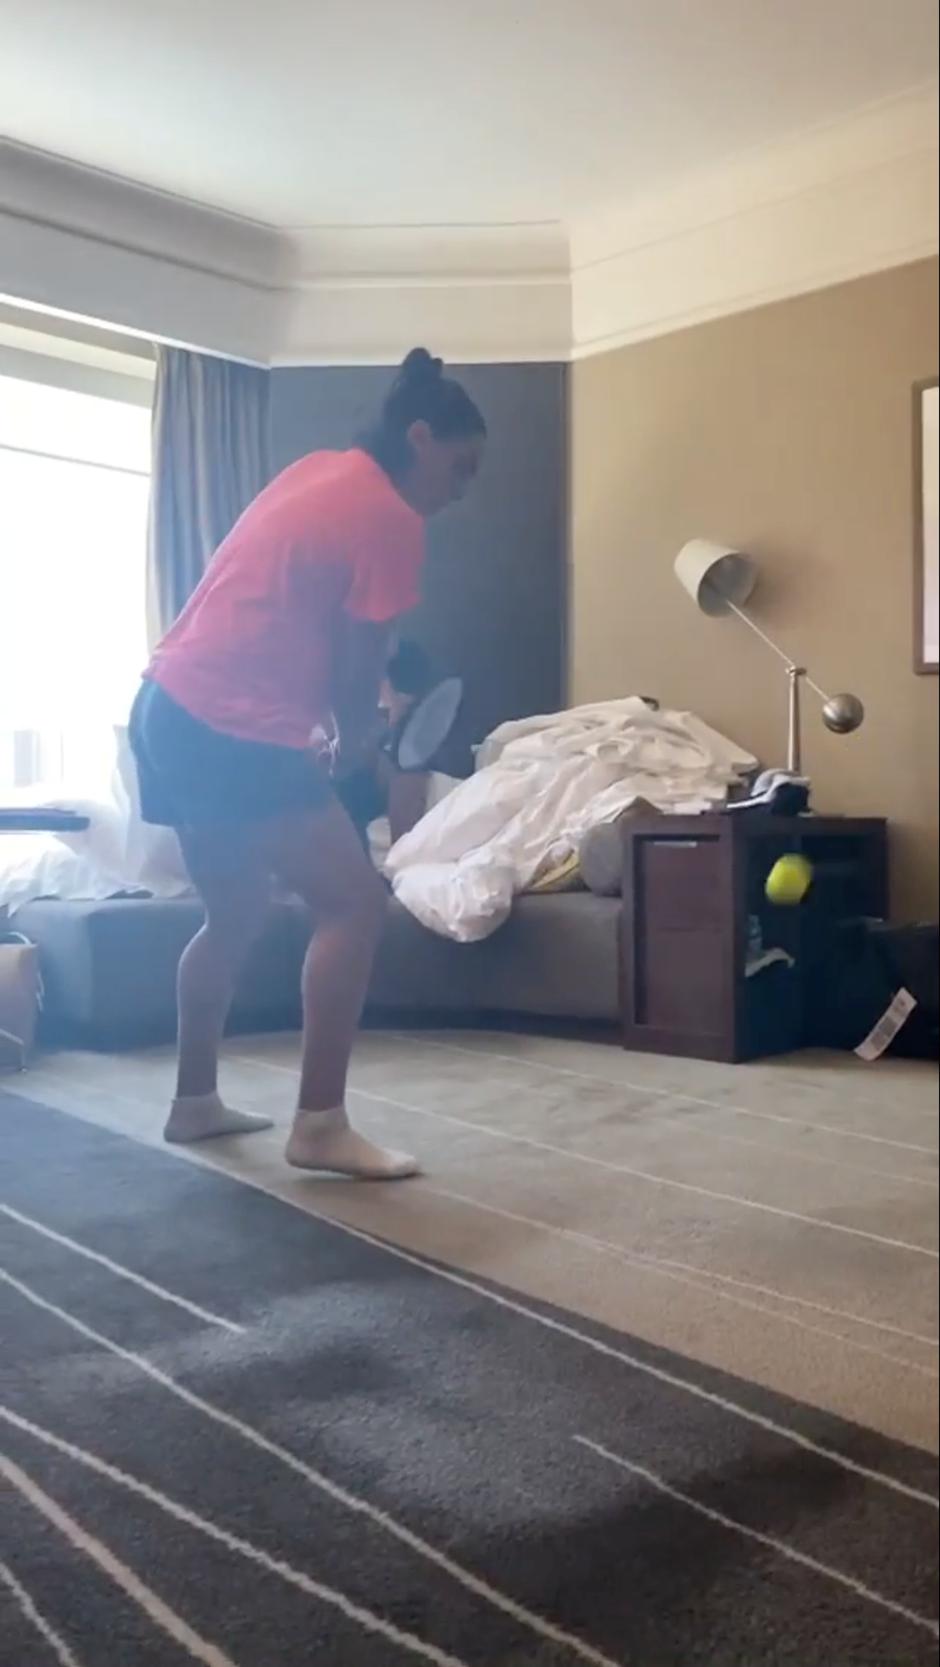 Tunisia's tennis player Ons Jabeurin hits a tennis ball towards a mattress leaning on a wall at a hotel room in Melbourne